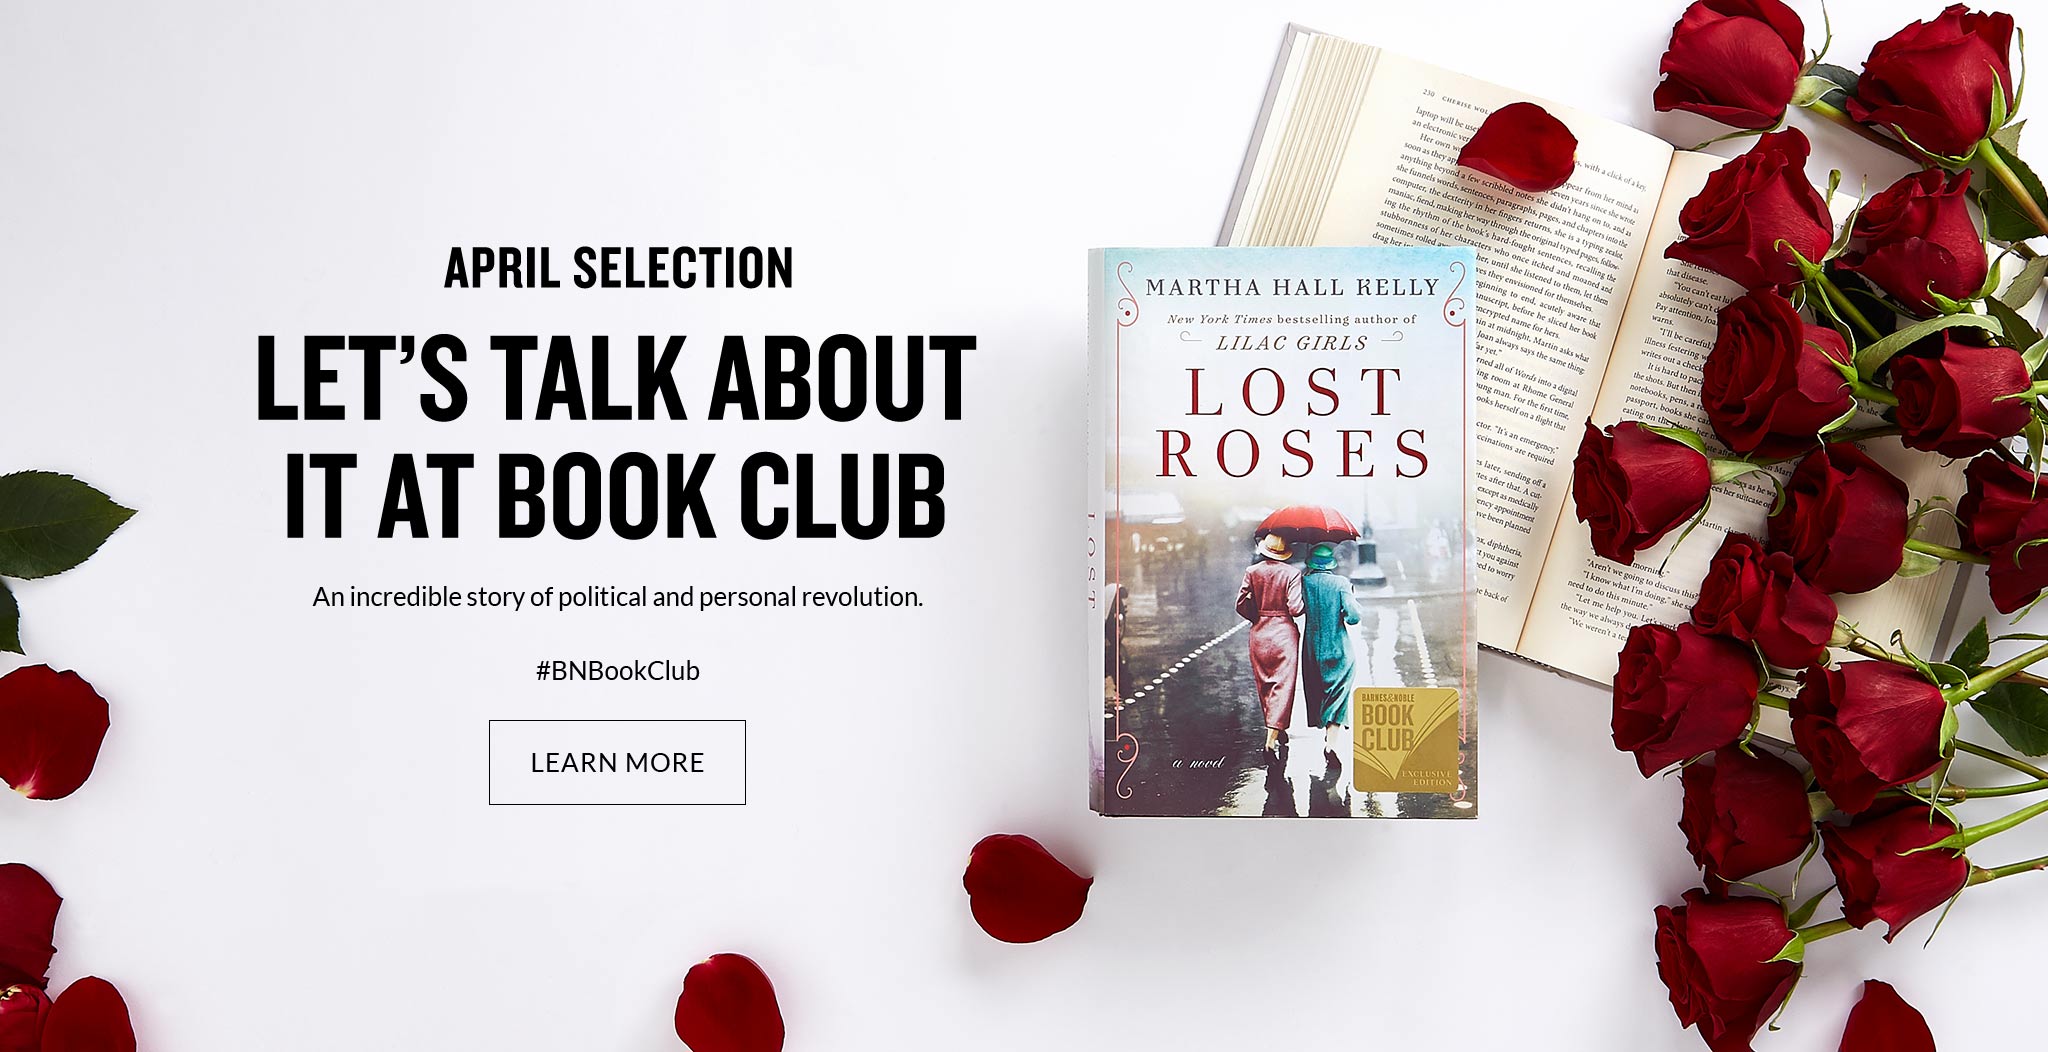 Let's Talk about it At Book Club!  Weâll delight in this tale of historical fiction about the astonishing strength of the feminine spirit. #BNBookClub   Learn More  